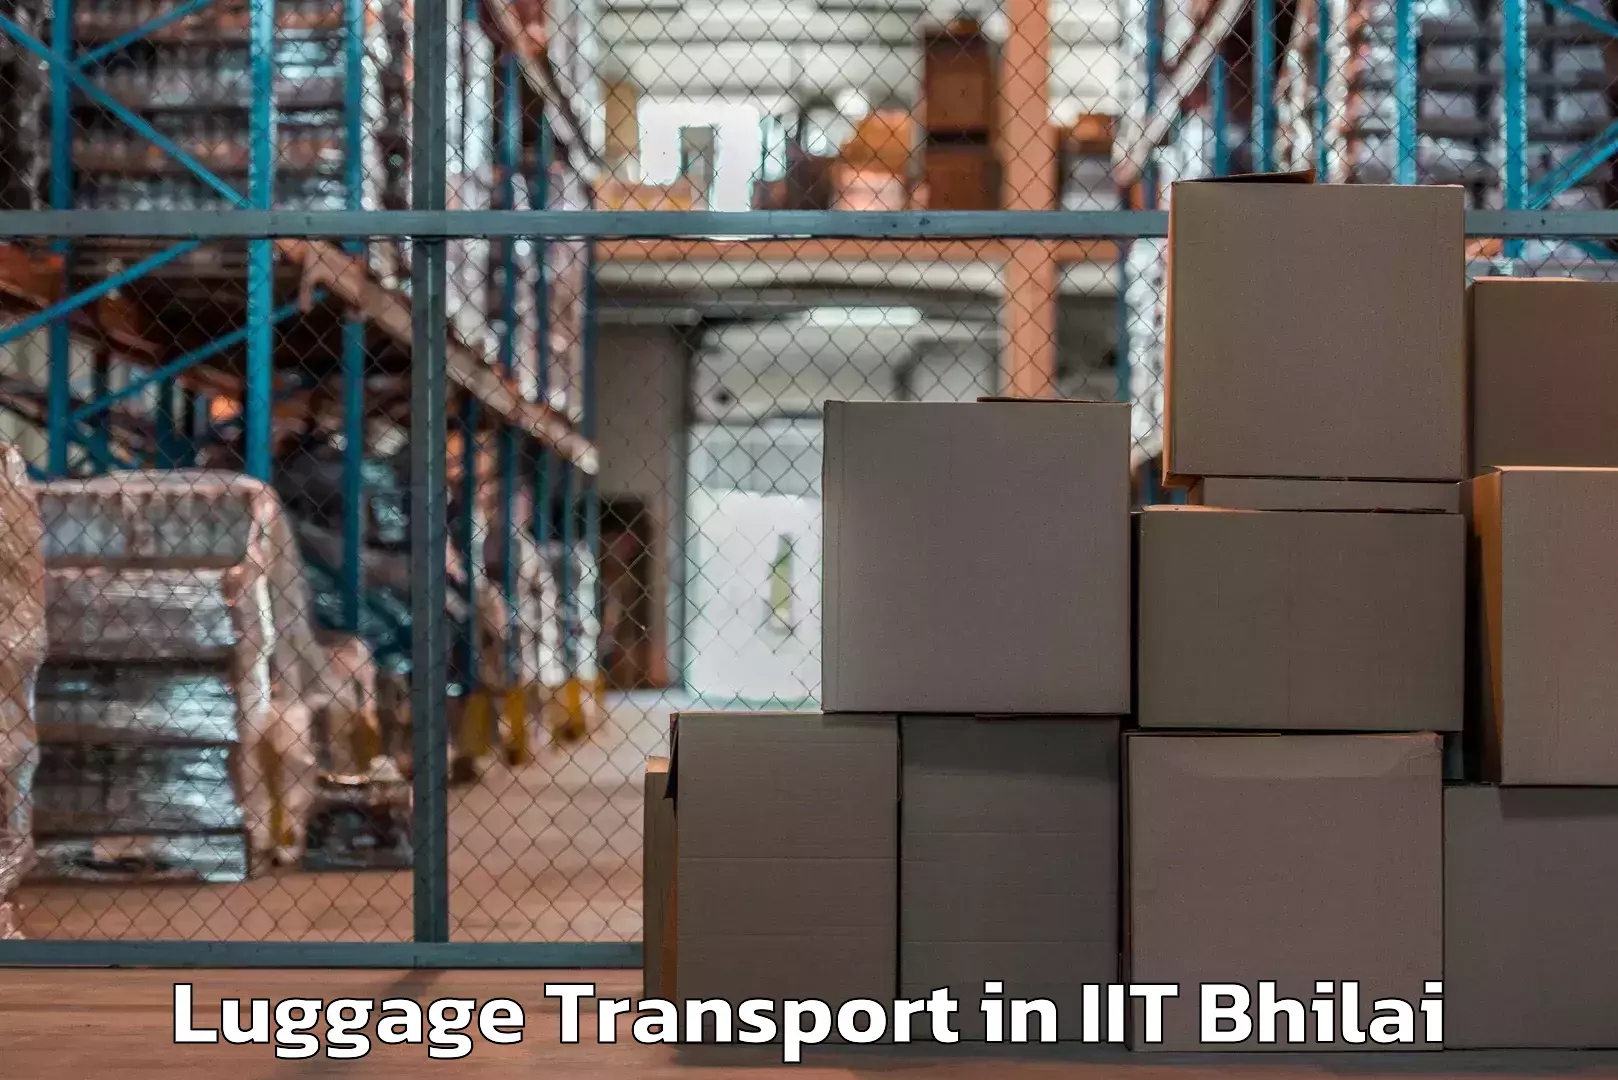 Luggage shipment specialists in IIT Bhilai